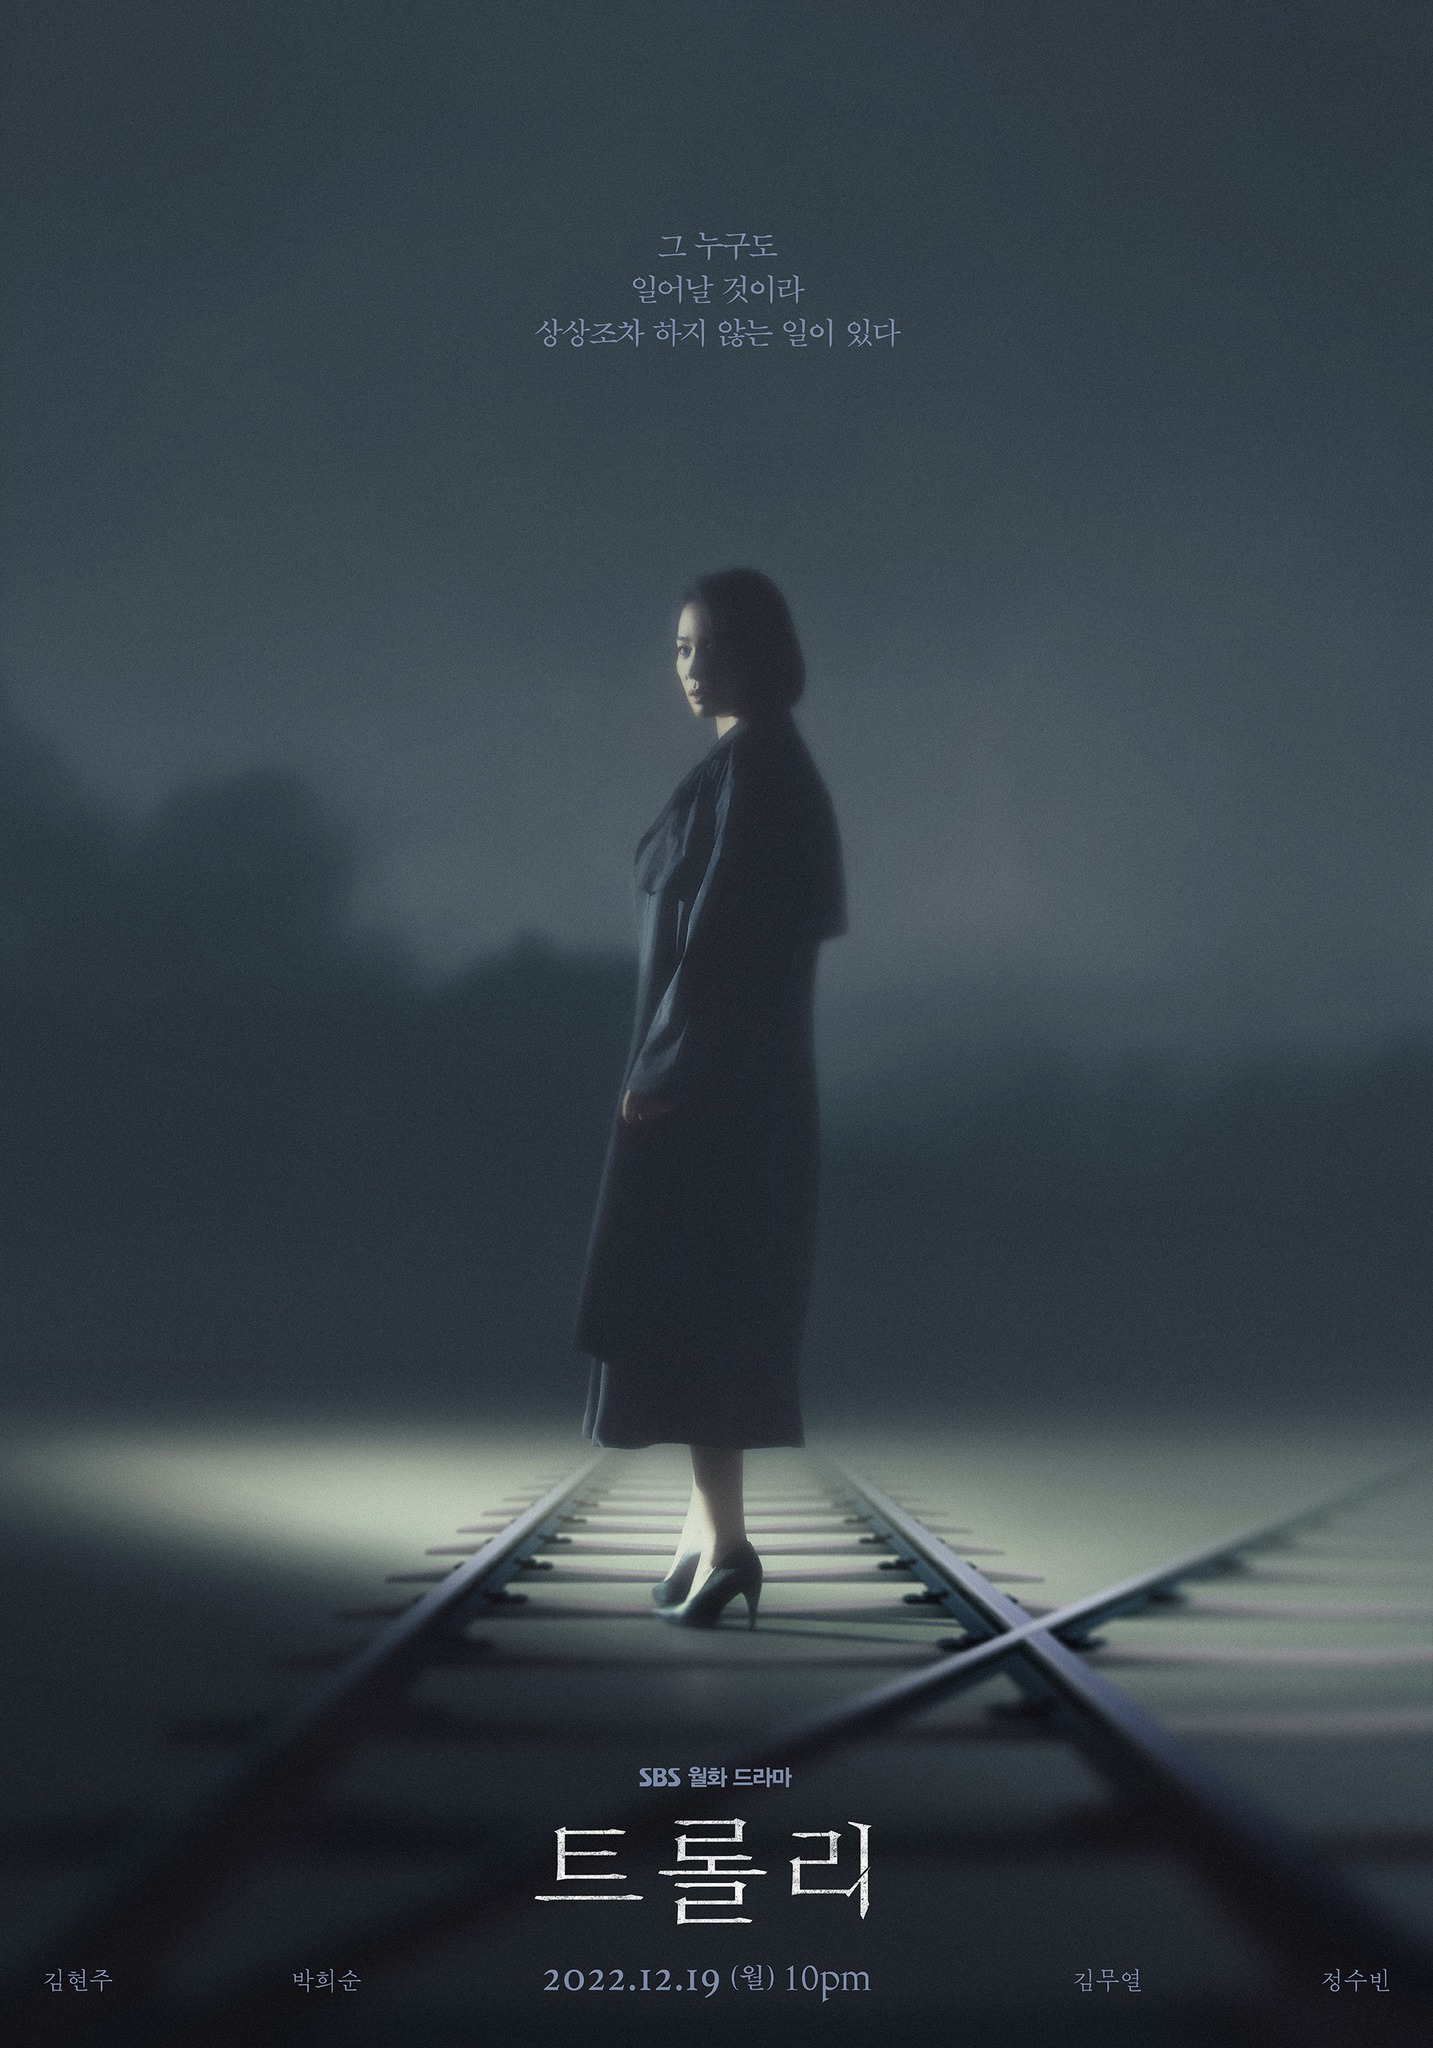 SBS's upcoming mystery Trolley hints at intrigue to come